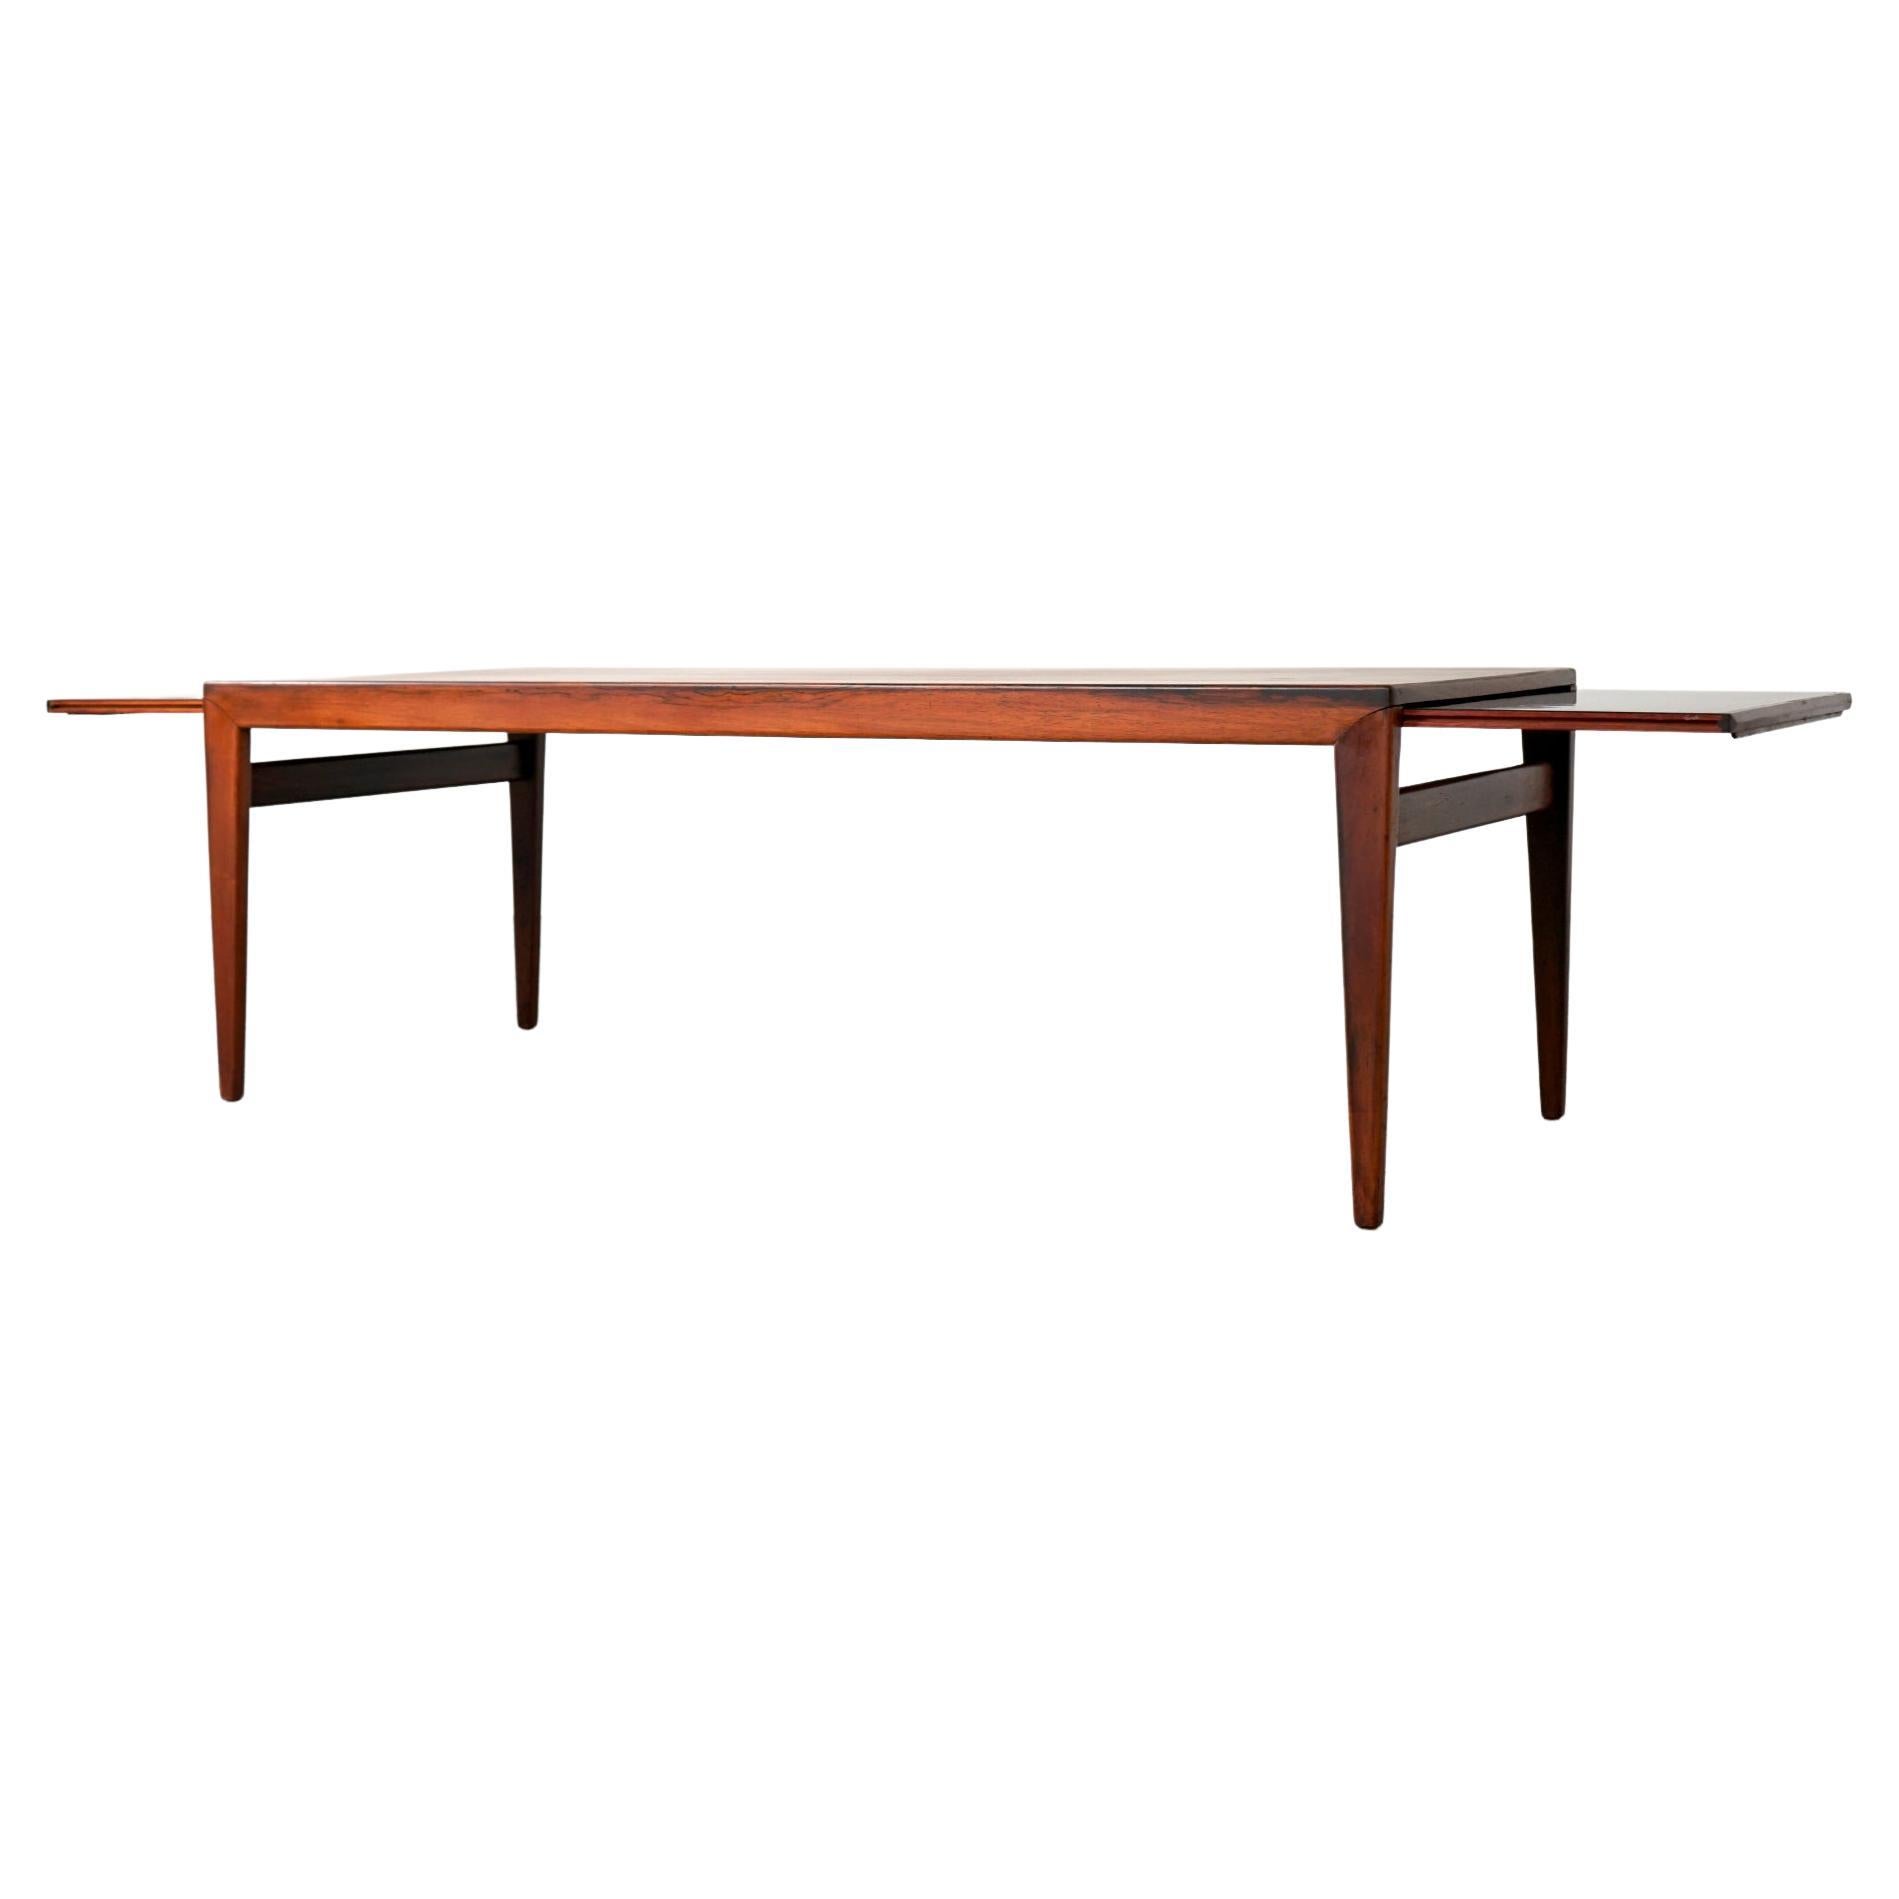 Danish Mid-Century Modern Rosewood Coffee Table with Leaves